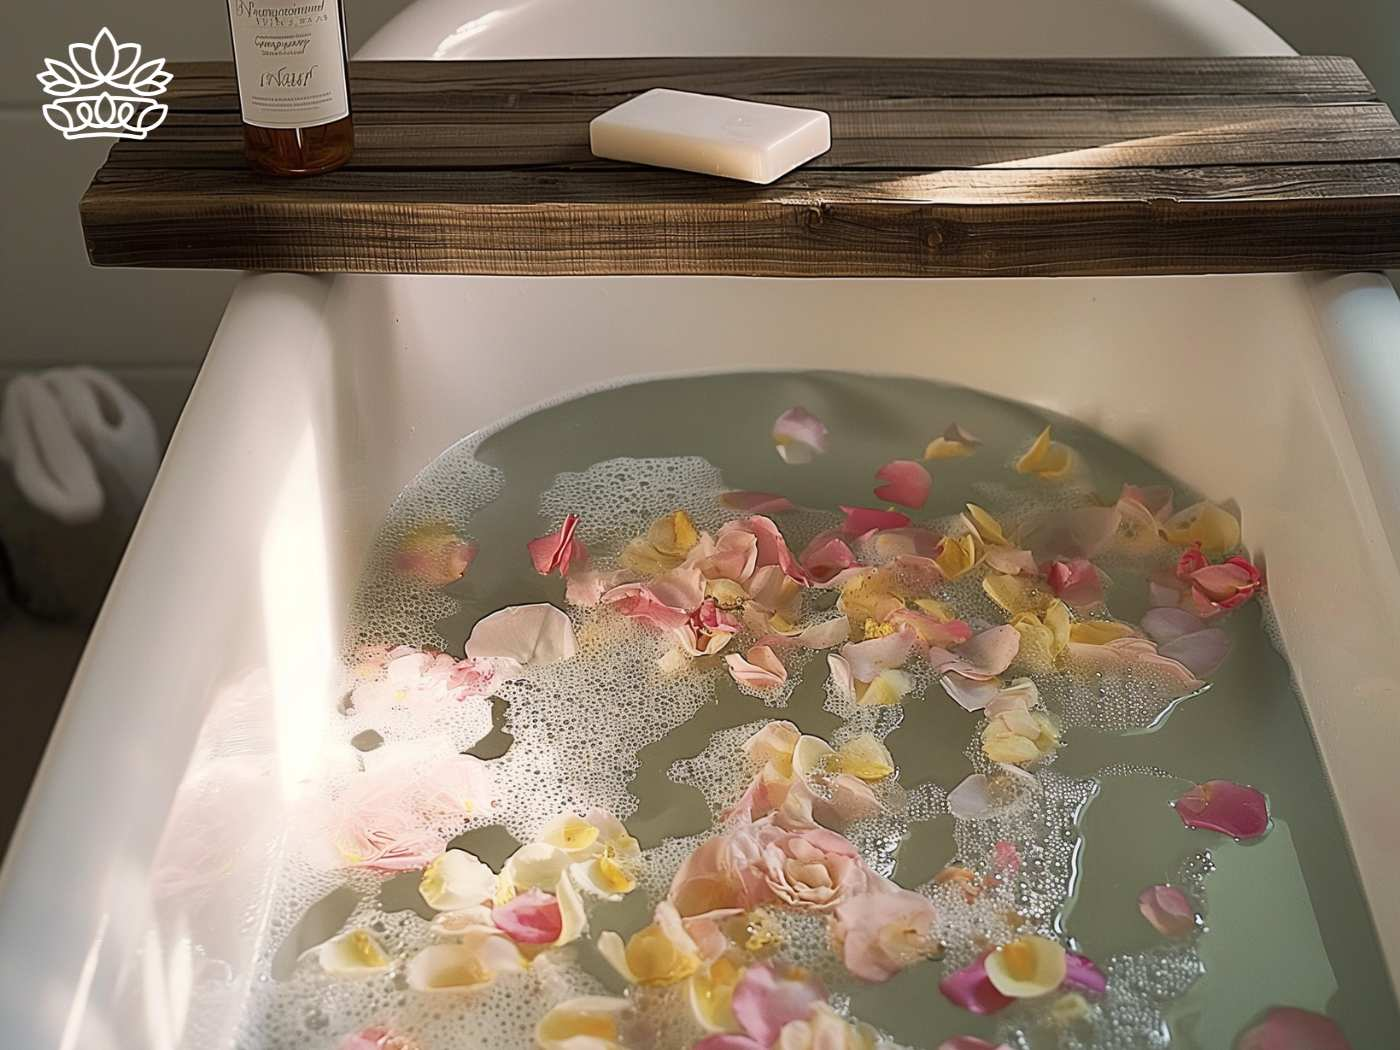 Relaxing bath time ambiance with floating pink and yellow rose petals in a clawfoot tub, accompanied by a wooden bath caddy with soap and bottled products, available from Fabulous Flowers and Gifts.